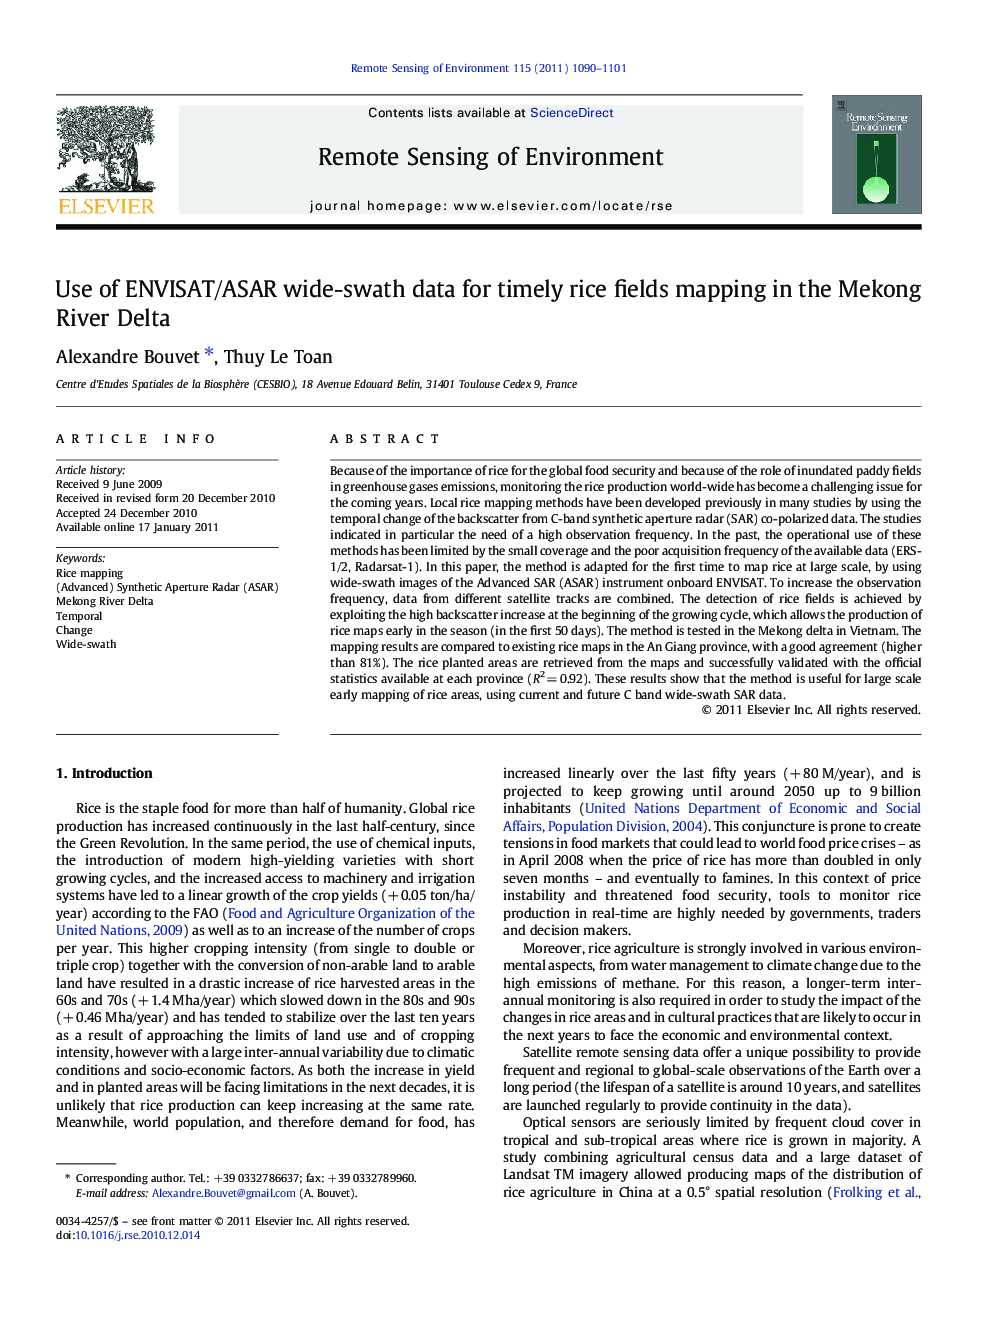 Use of ENVISAT/ASAR wide-swath data for timely rice fields mapping in the Mekong River Delta